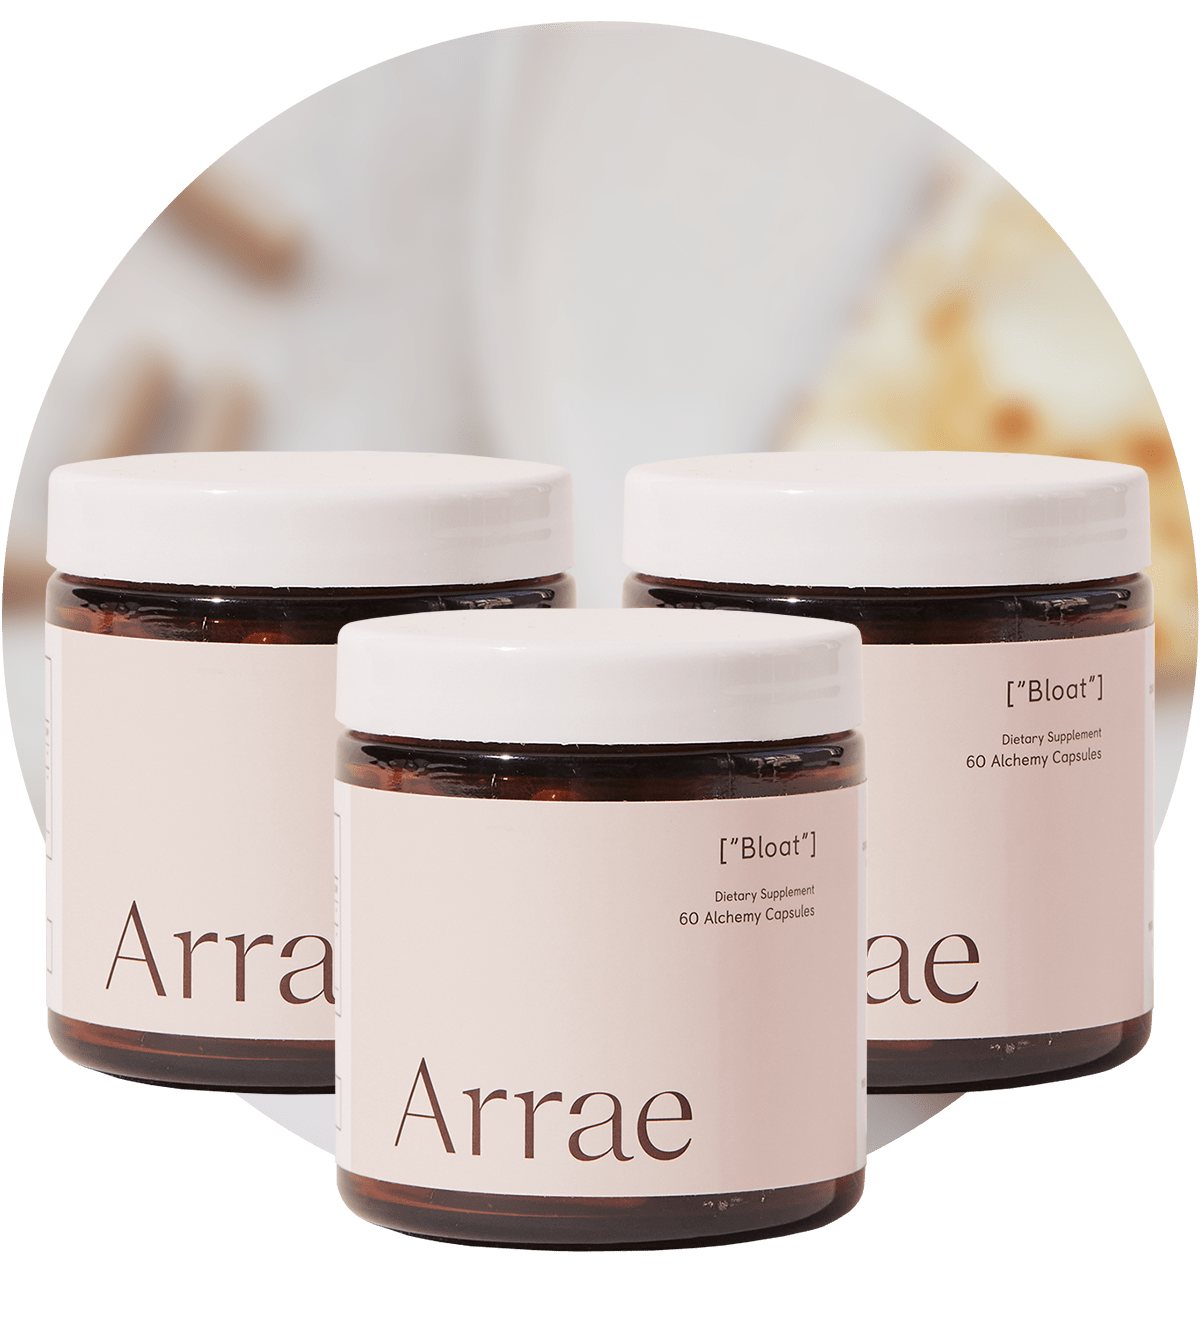 Arrae Bloat Supplement - Three jars of 60 capsules with natural ingredients, designed to support digestive health and reduce bloating